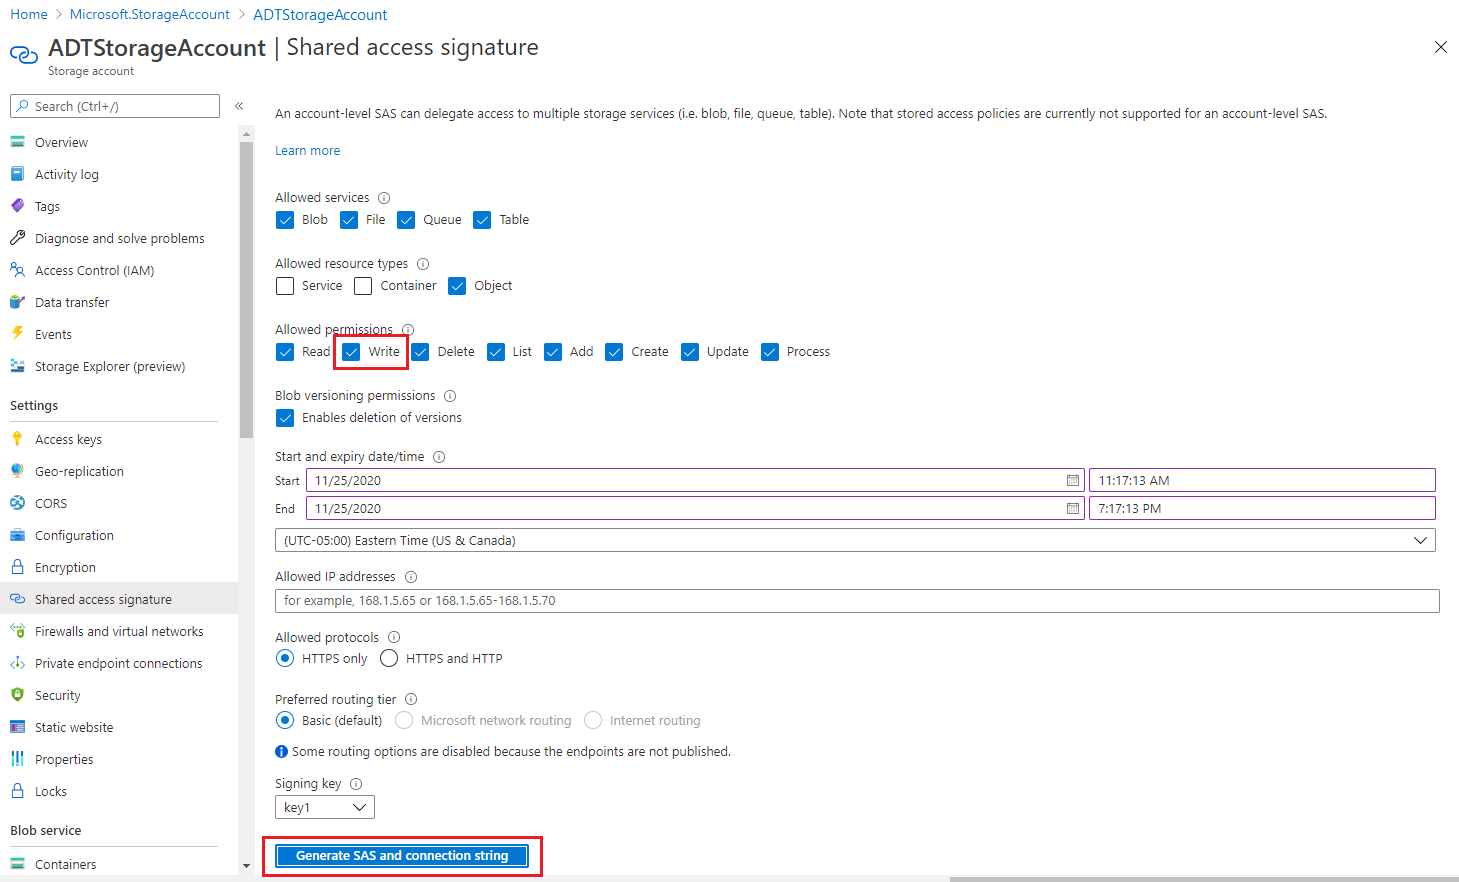 Screenshot of the storage account page in the Azure portal showing all the setting selection to generate a SAS token.